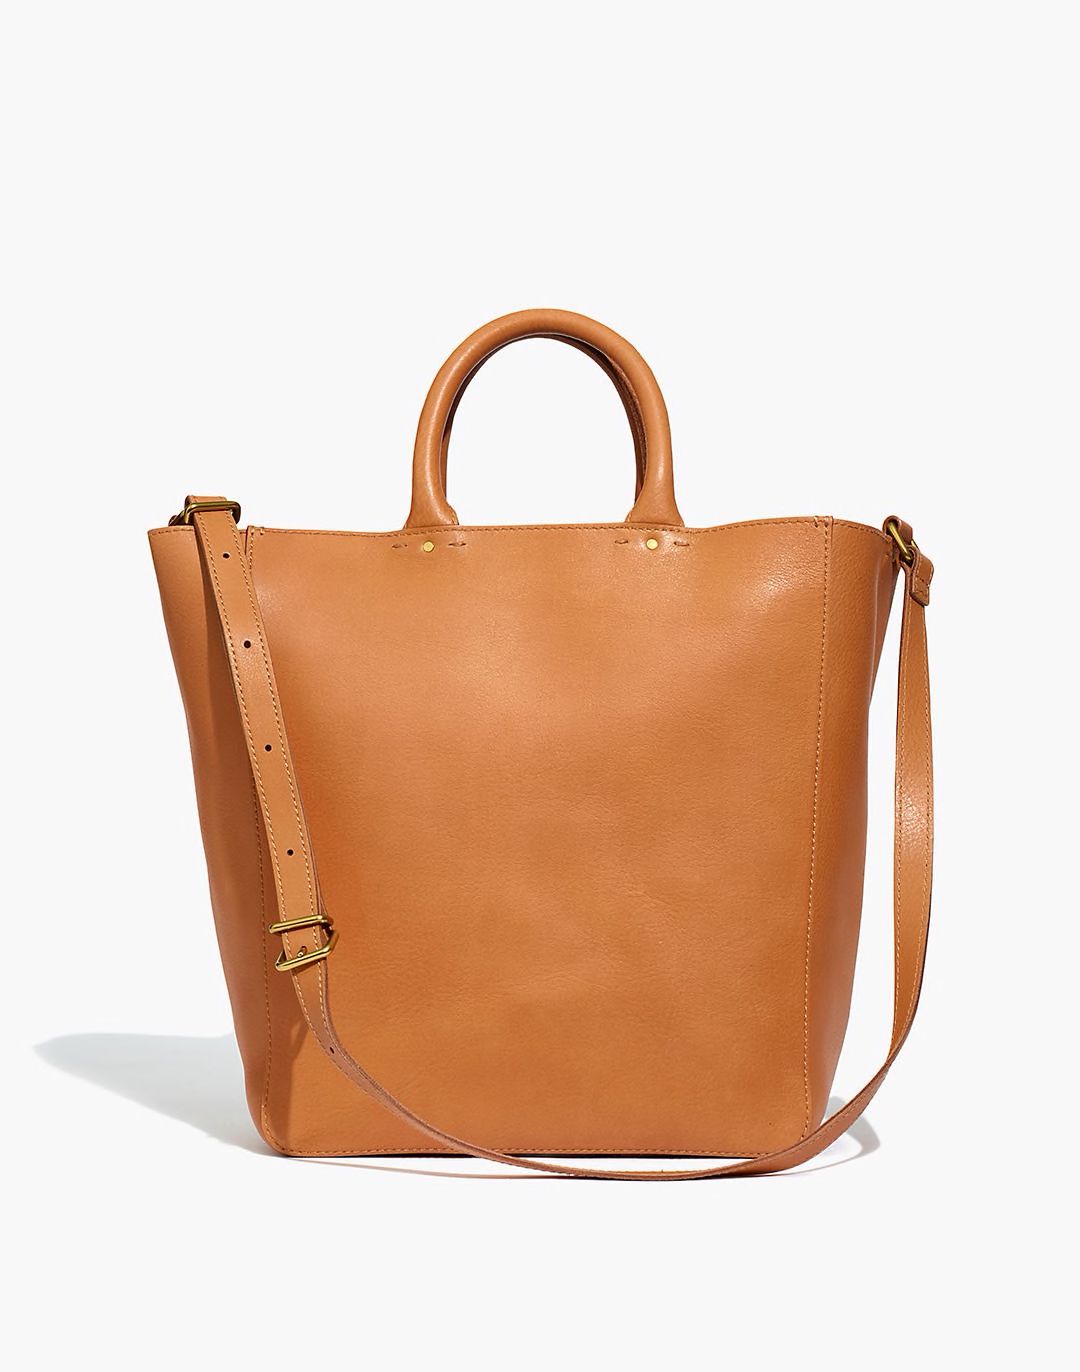 Madewell The Abroad Tote